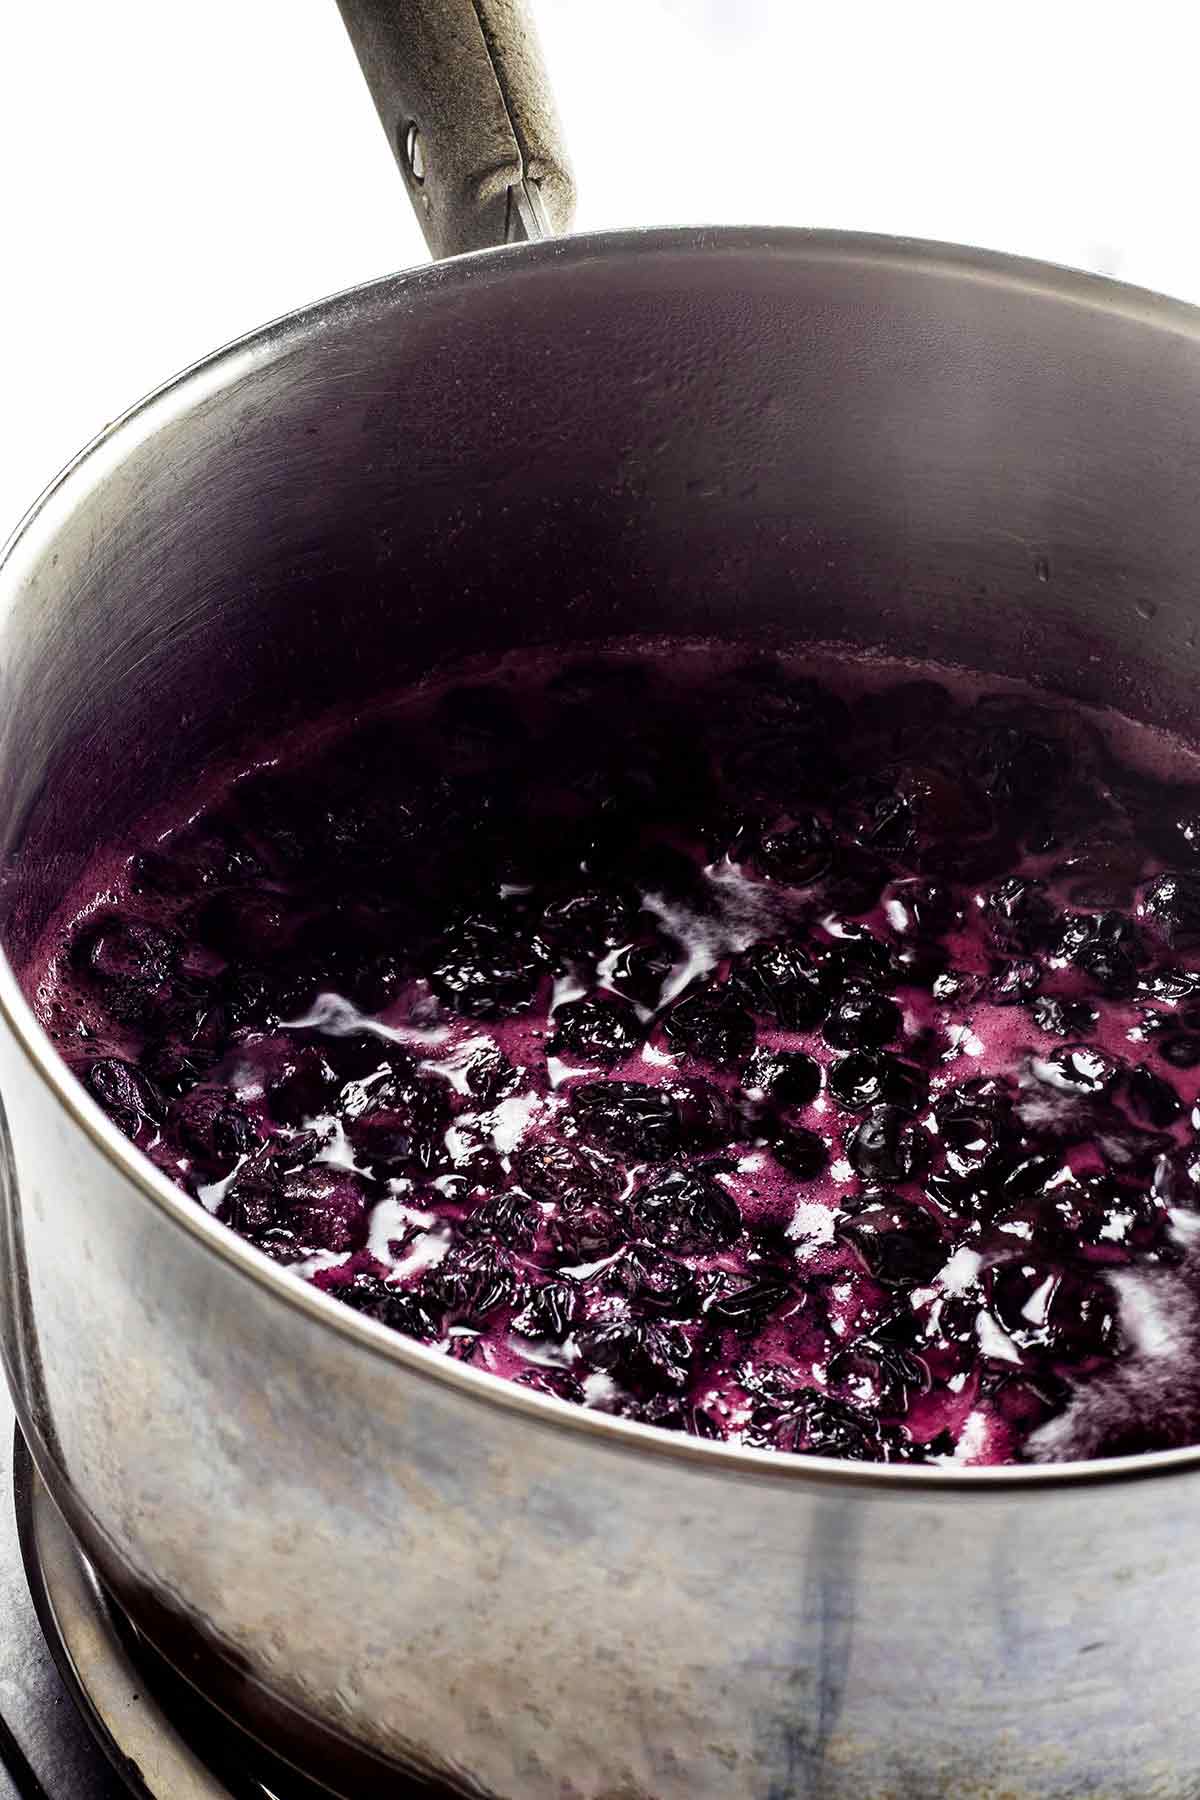 Blueberry syrup cooking in a saucepan